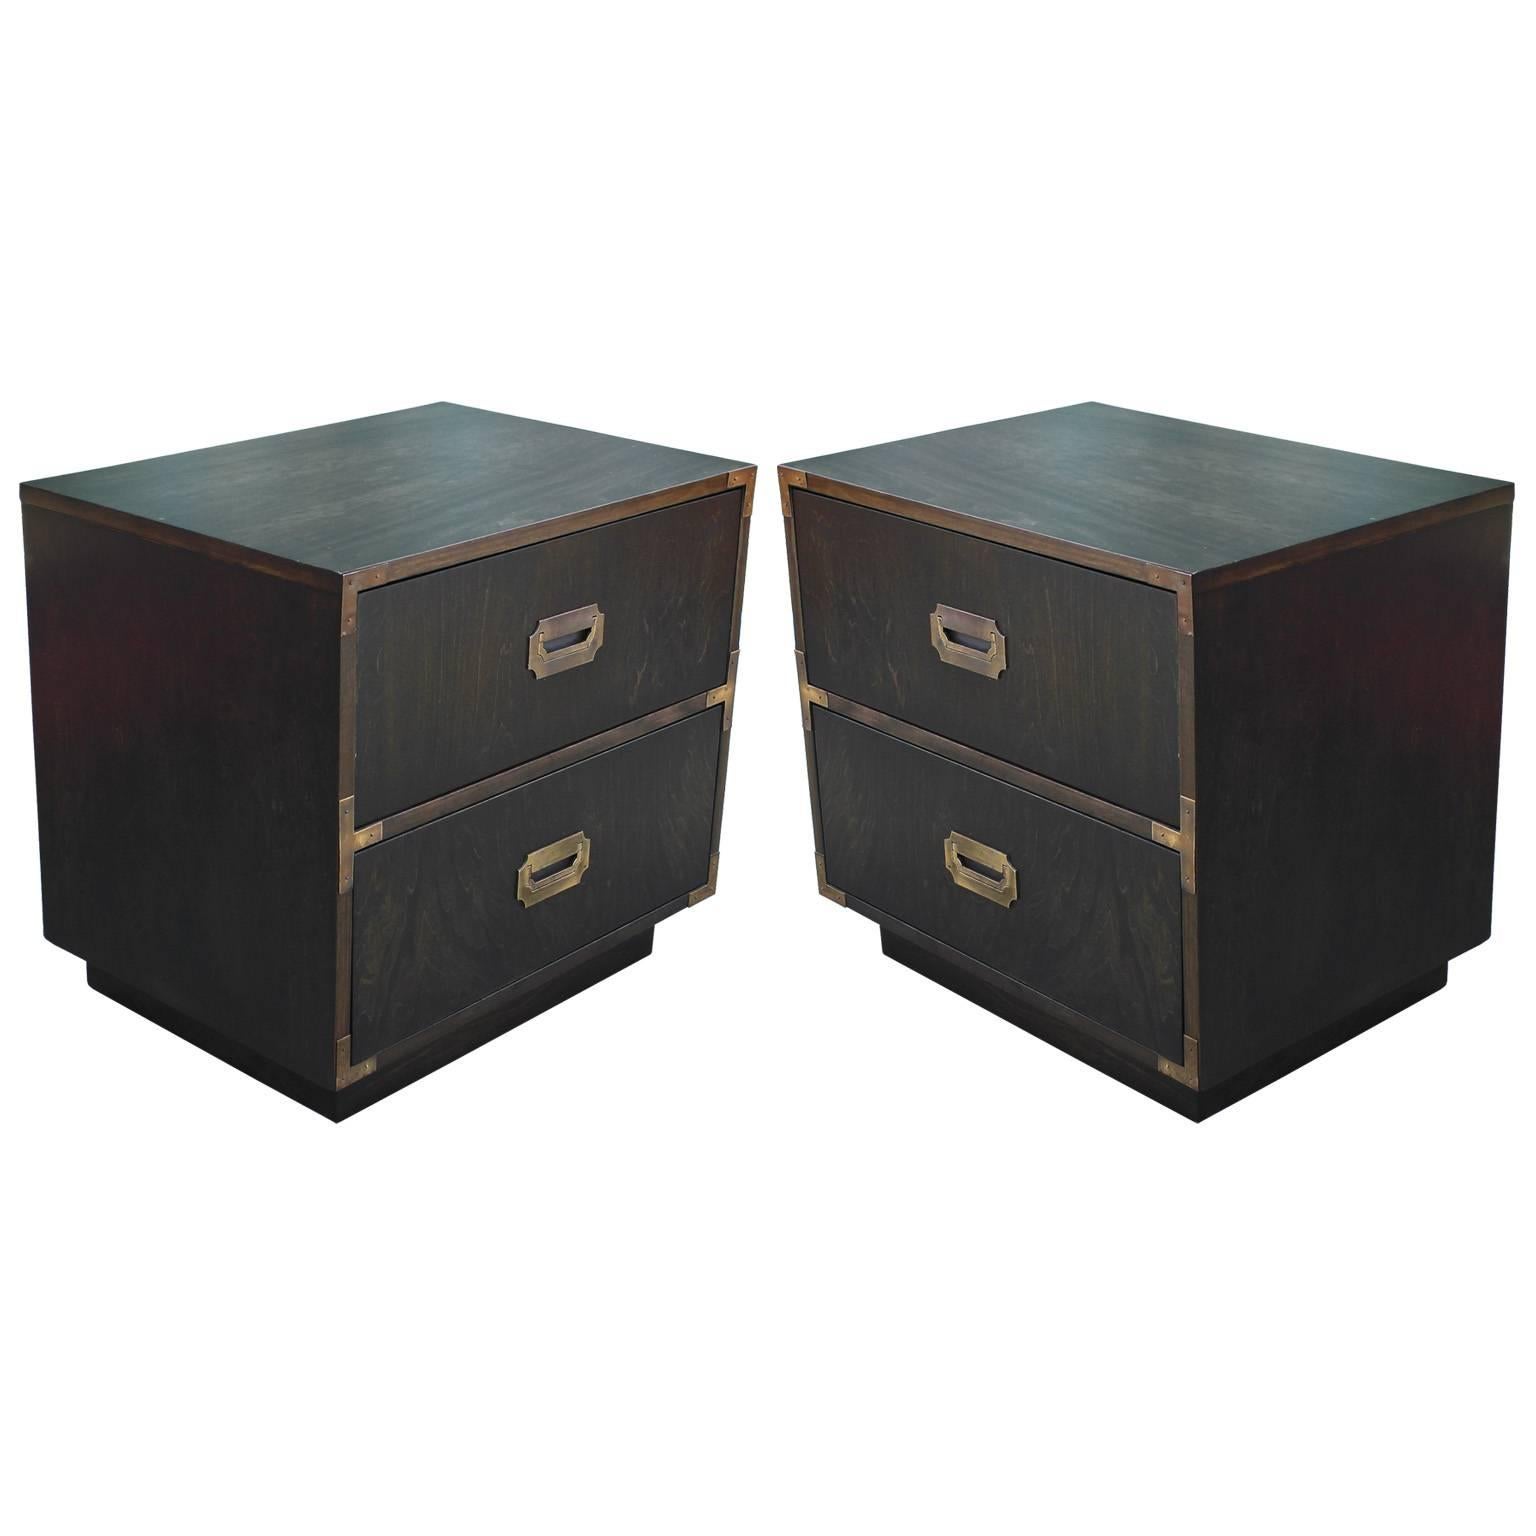 Fabulous Pair of Campaign Style Night Stands or Chests